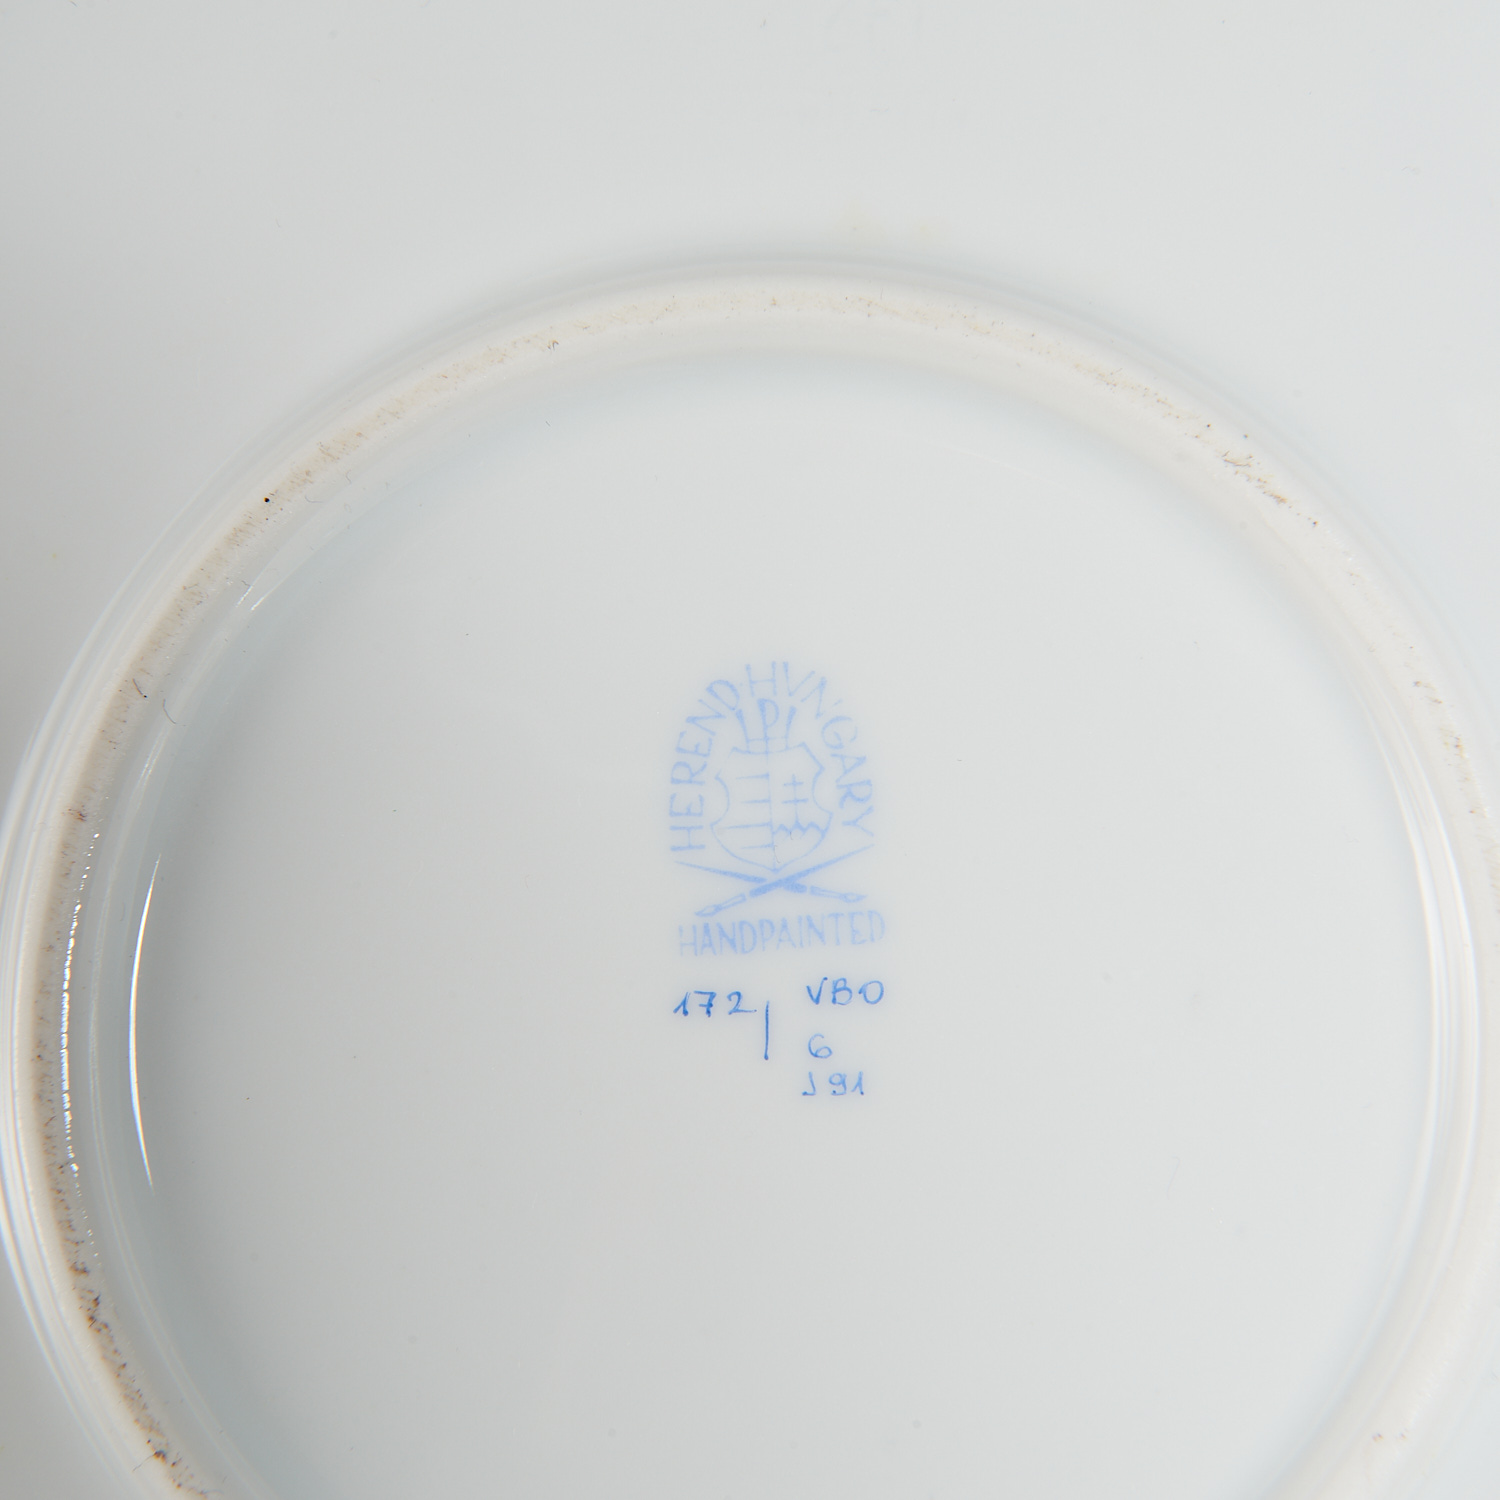 Herend Porcelain Tureen and Platter - Image 7 of 7